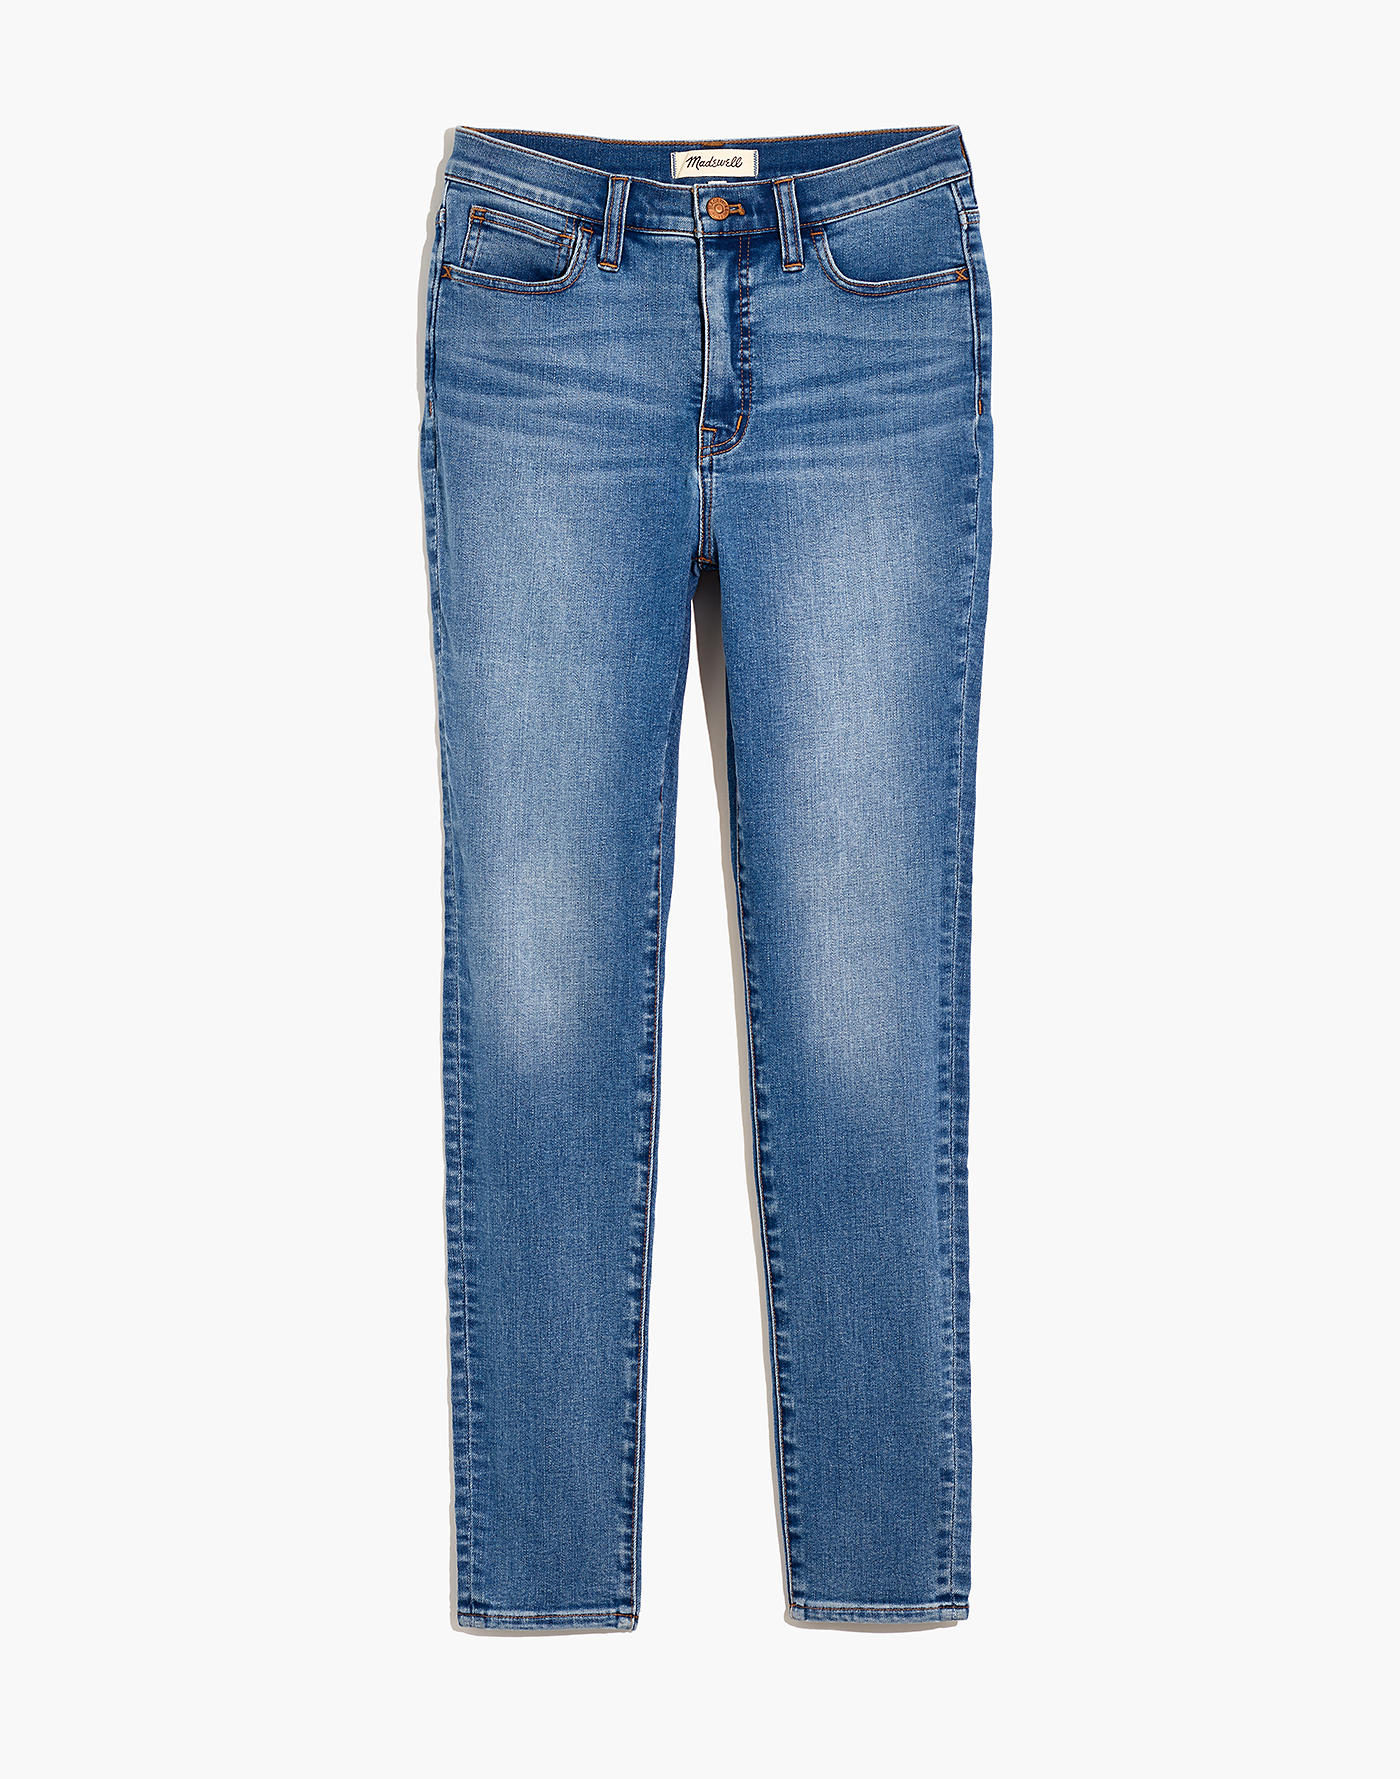 Madewell 10 High-Rise Roadtripper Authentic Jeans in Vinton Wash